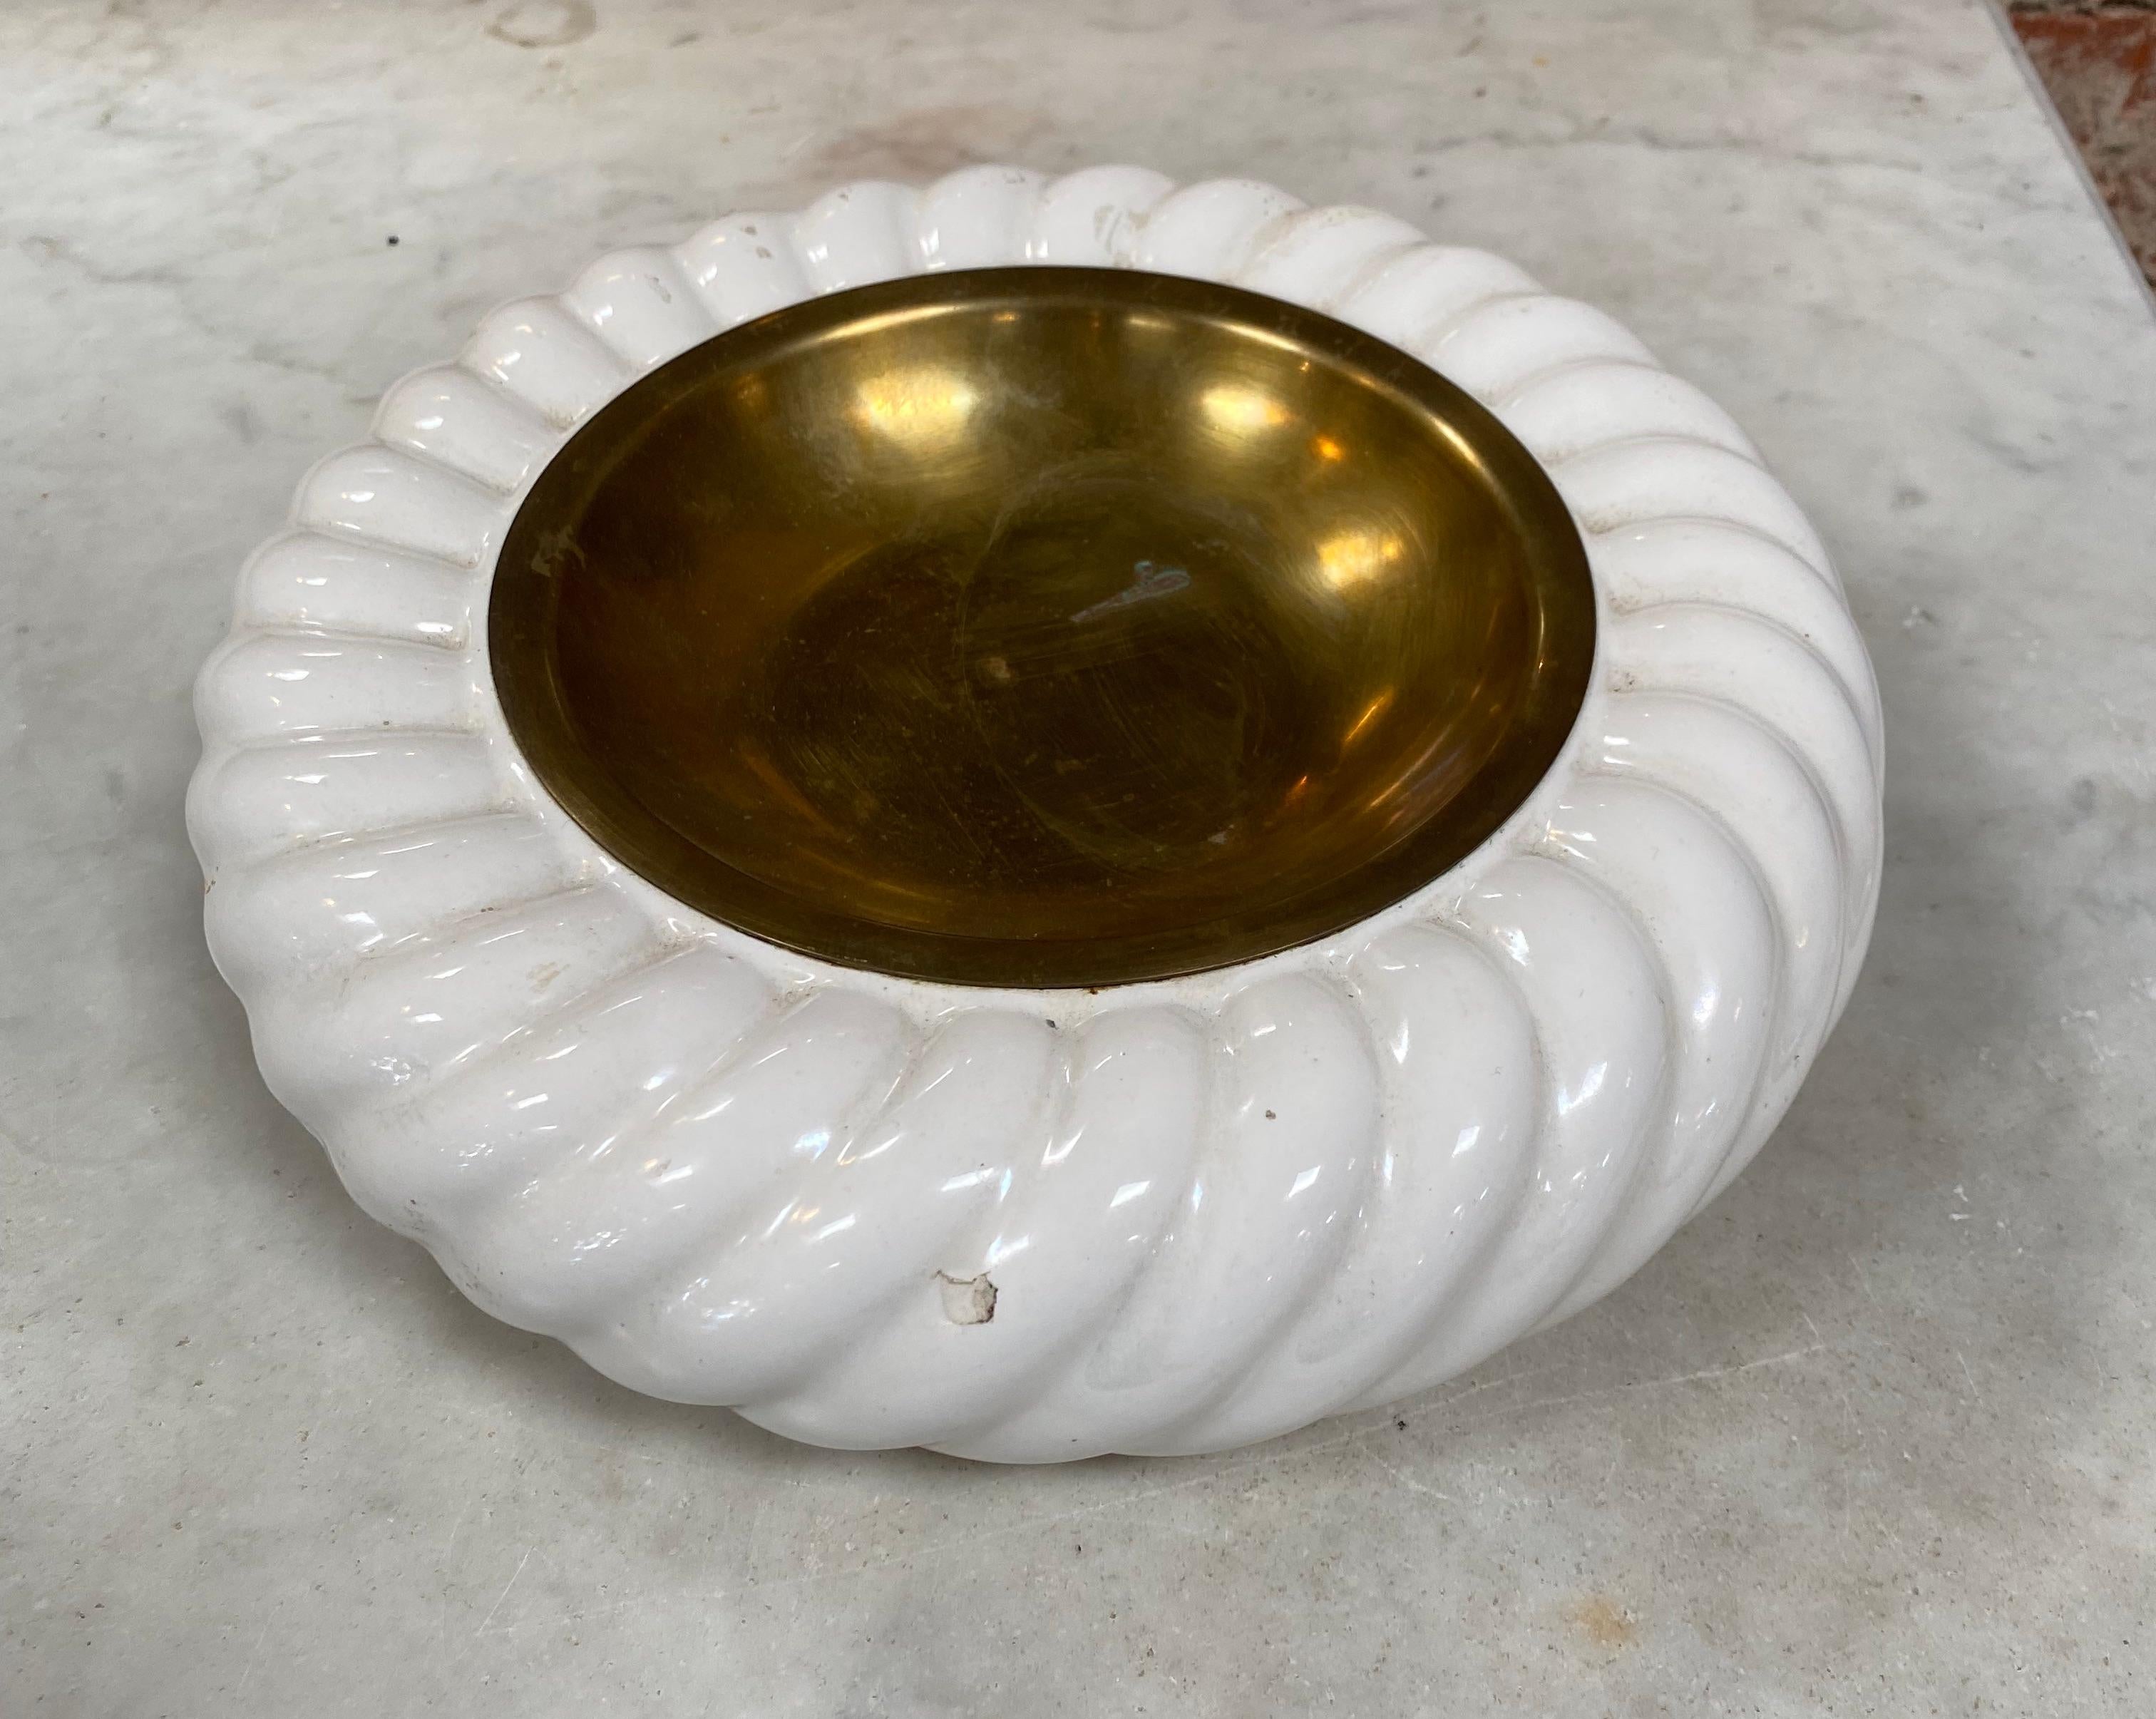 Beautiful vintage Italian ashtray made with porcelain in Italy signed by Tommaso Barbi.
The manufacturer's brand stamp is at the bottom of the item while on the outside, the vivid white of the ceramic, combined with the swirl pattern, creates an